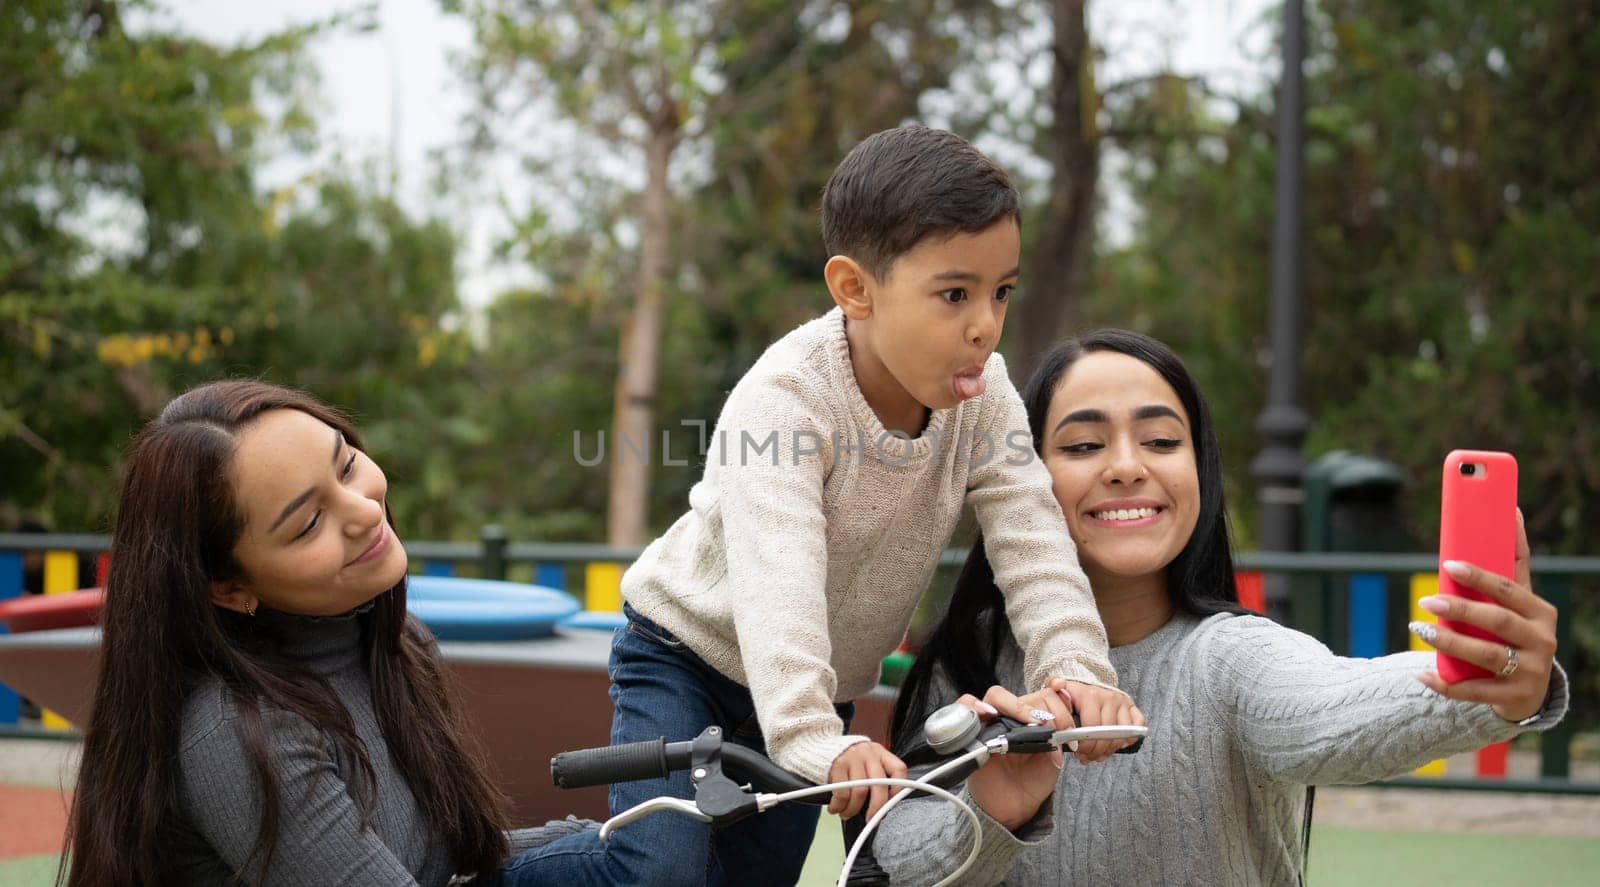 Lesbian mothers taking a funny selfie with her son outdoors in a park. Diversity and LGBT family social inclusion.